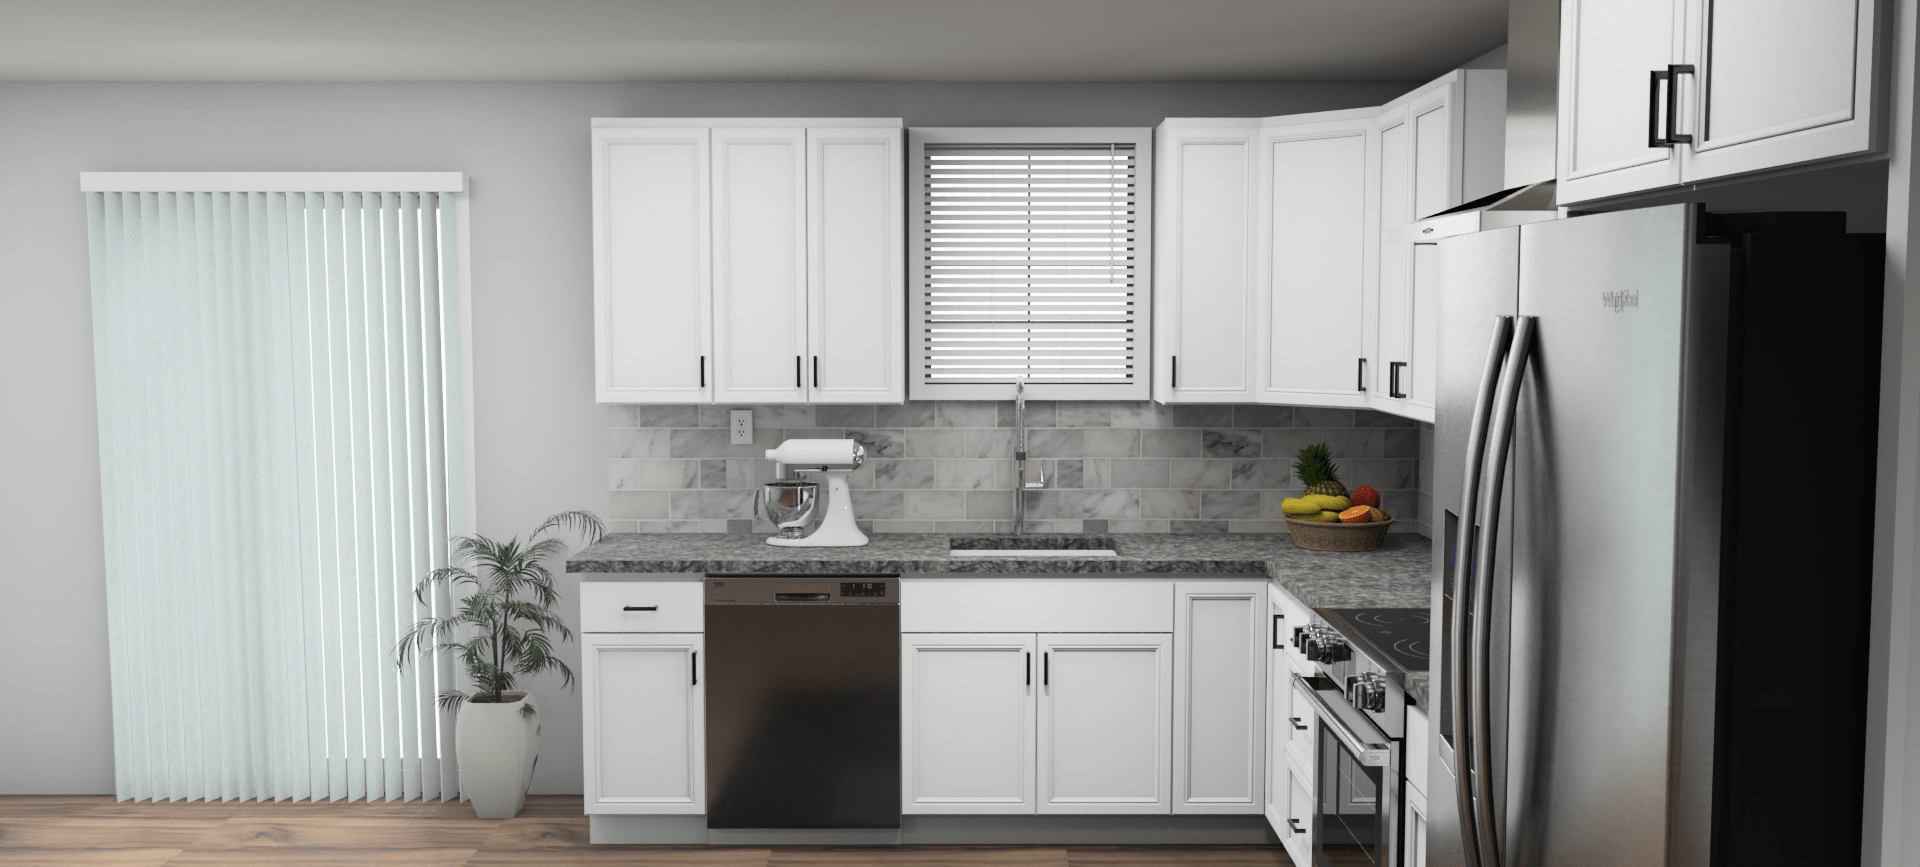 Pioneer The Modern White Shaker 9 x 13 L Shaped Kitchen Side Layout Photo